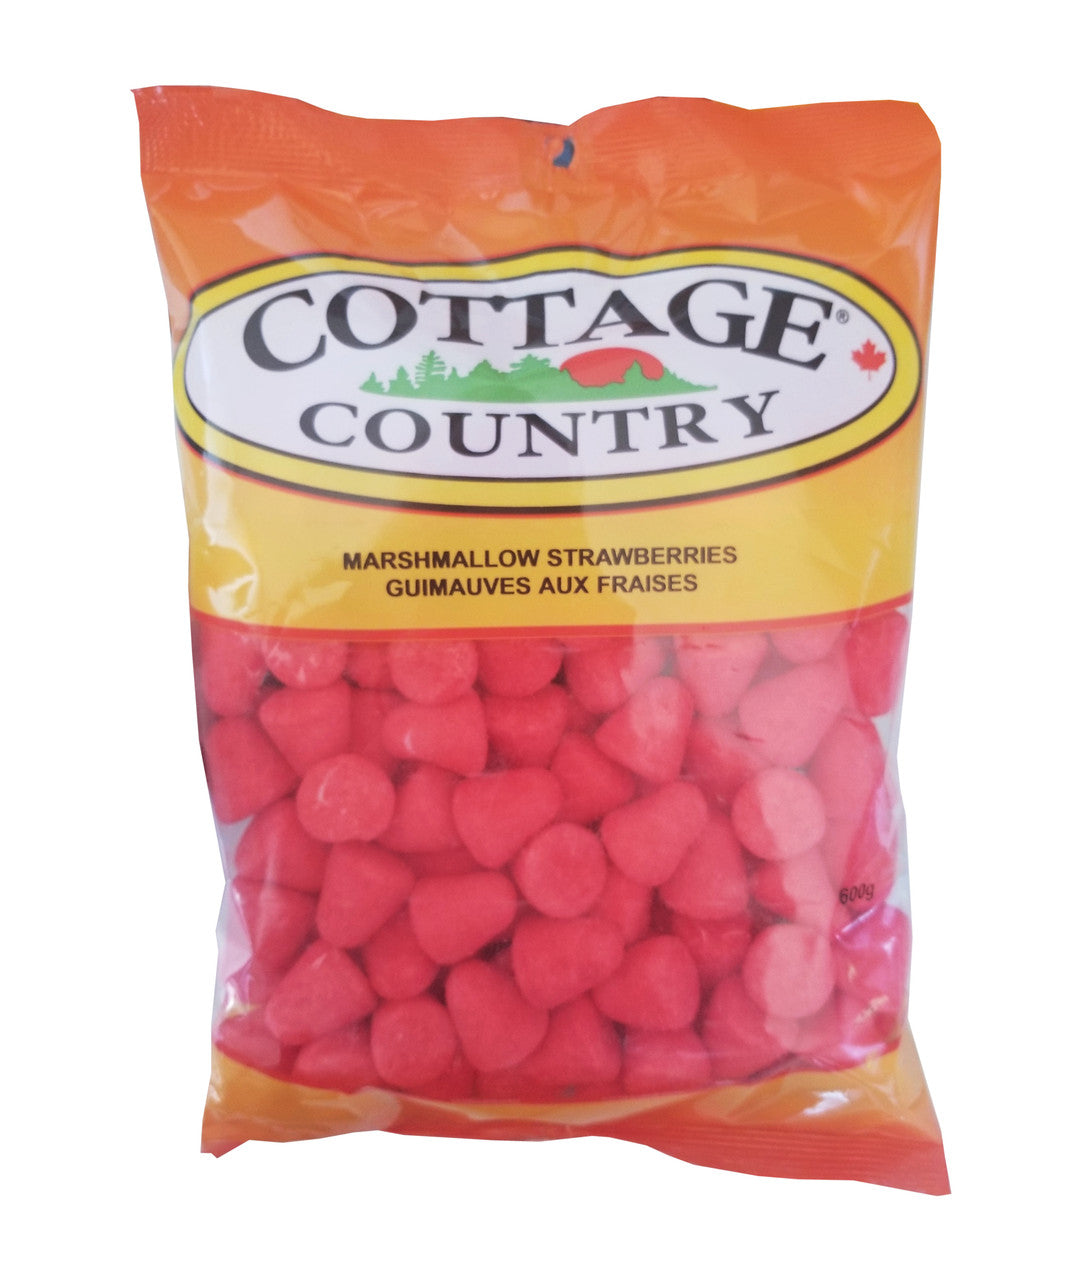 Cottage Country Marshmallow Strawberries, 600g/21 oz. Bag, {Imported from Canada}